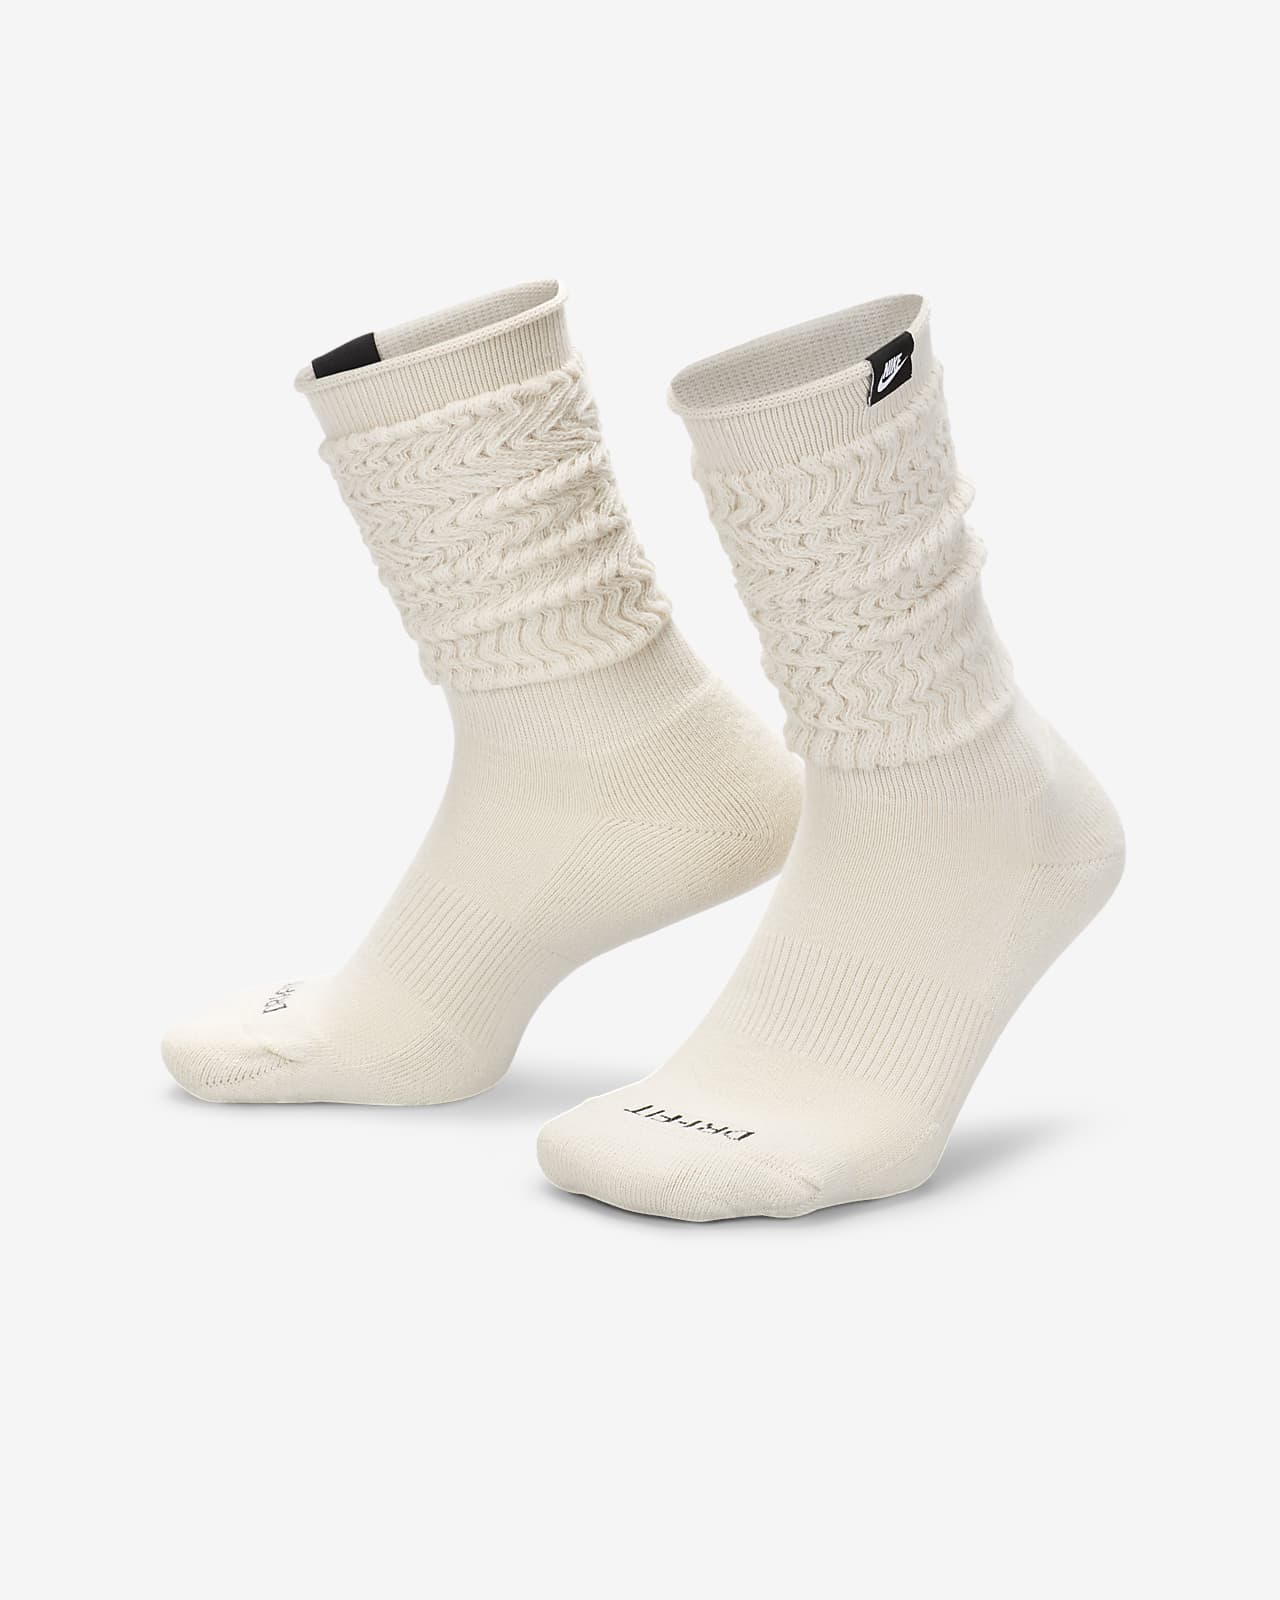 ULTIMATE cotton slouch socks 10-13 larger size - white